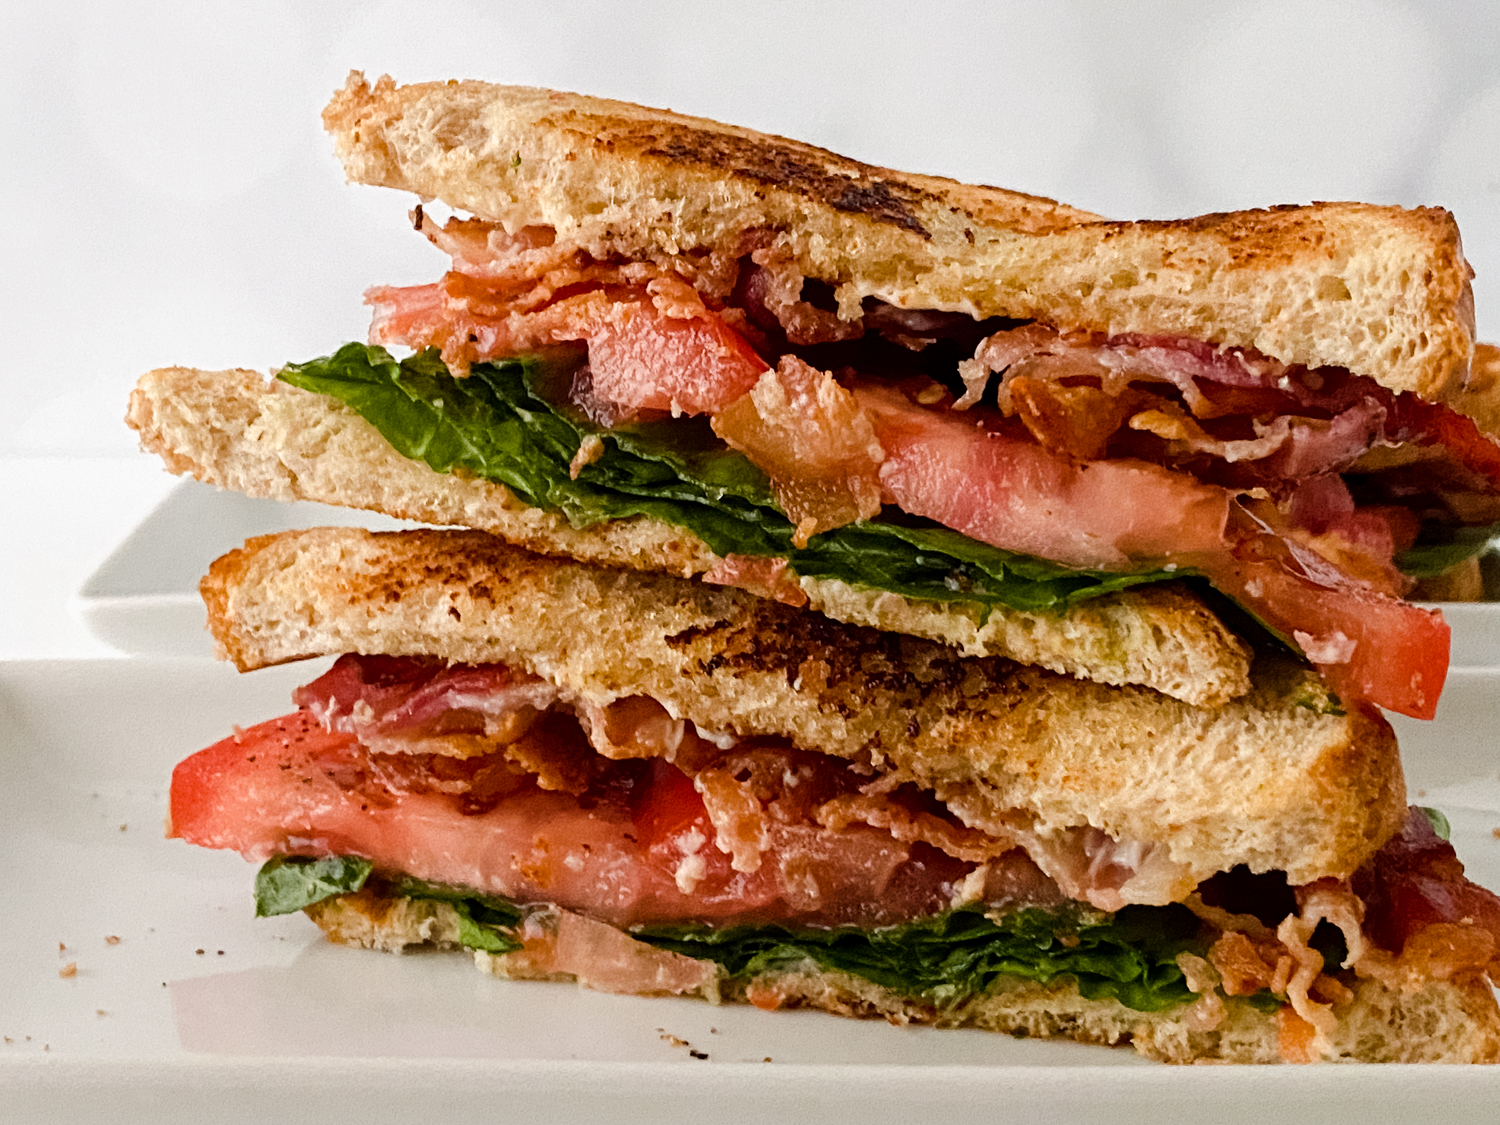 How to Make a Classic BLT Sandwich